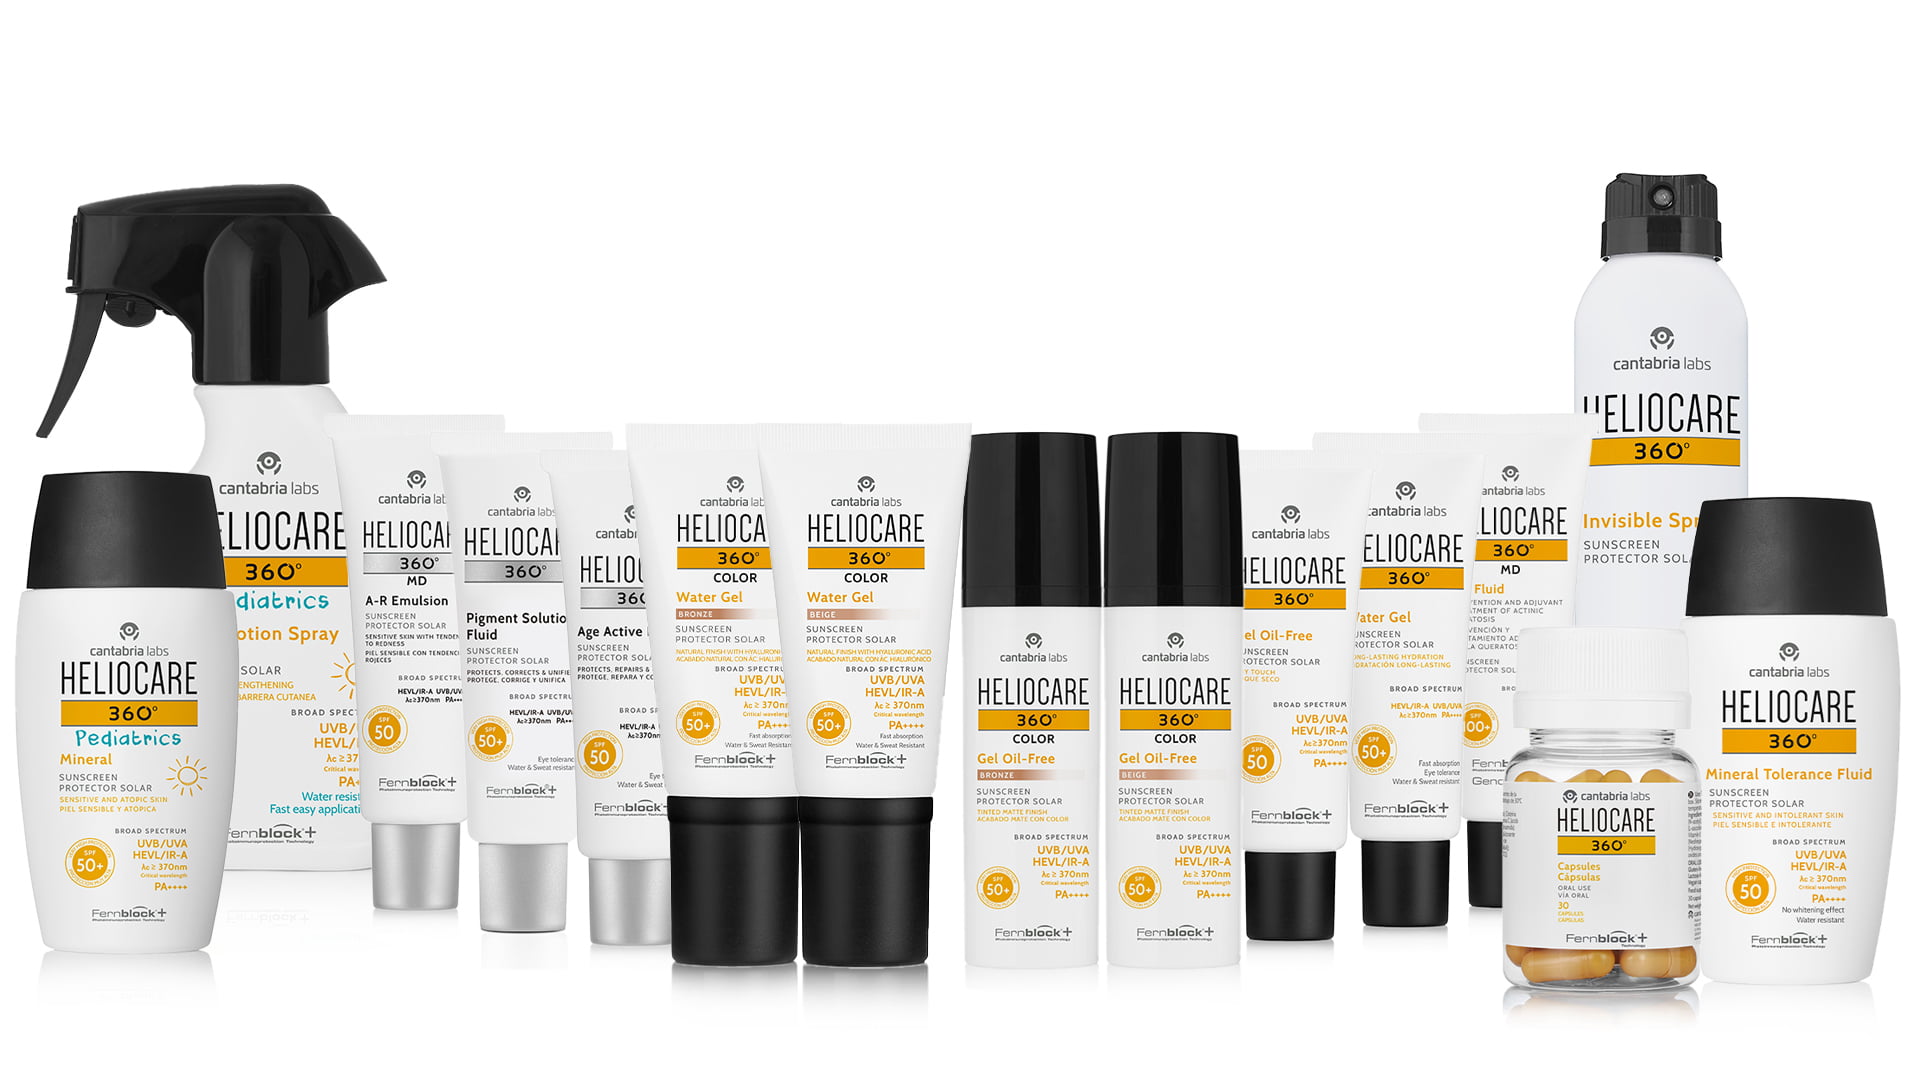 The range of Heliocare 360° products